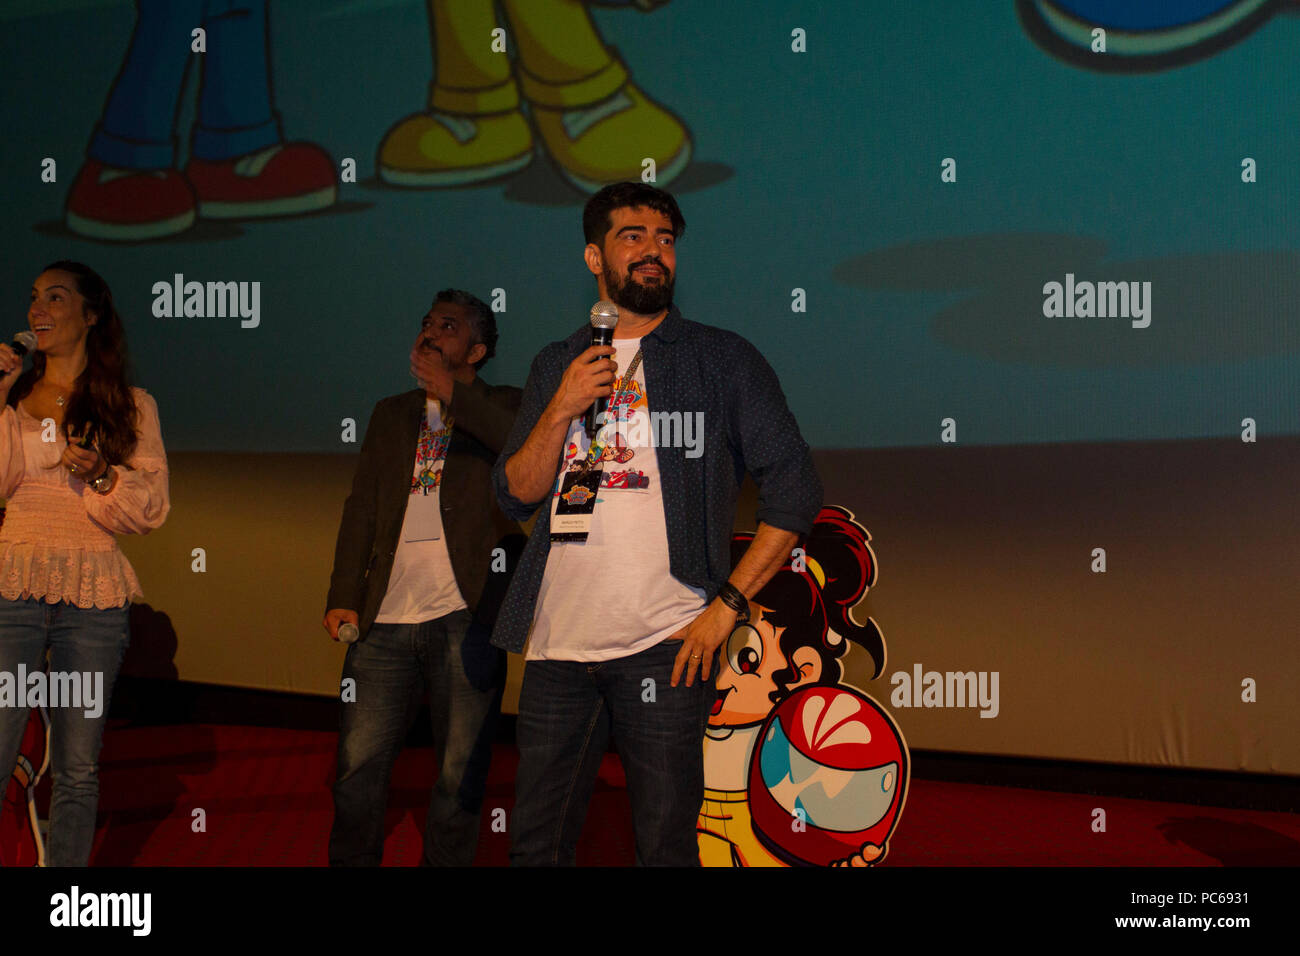 SÃO PAULO, SP - 31.07.2018: ANIMAÇÃO DO SENNINHA É LANÇADA EM SP - This event was held on Tuesday (31) the launch event of the new animated series of the character Senninha that will premiere on 08/08 on Gloobat&#39;s Glat cat channel. The animation that is inspired by three-time Formula 1 champion on Senna is called &quotquot;Senninha na Pista Maluca&quot; (&amotquot;Senninha na Pista Maluca&quot;), which has 26 epis, ewithwith 11 minutes, which will be shown dai daily at various times.hlights include Bianca Sennaenna, director of branding for the Ayrton Senna Institute and niece of the pilot Stock Photo